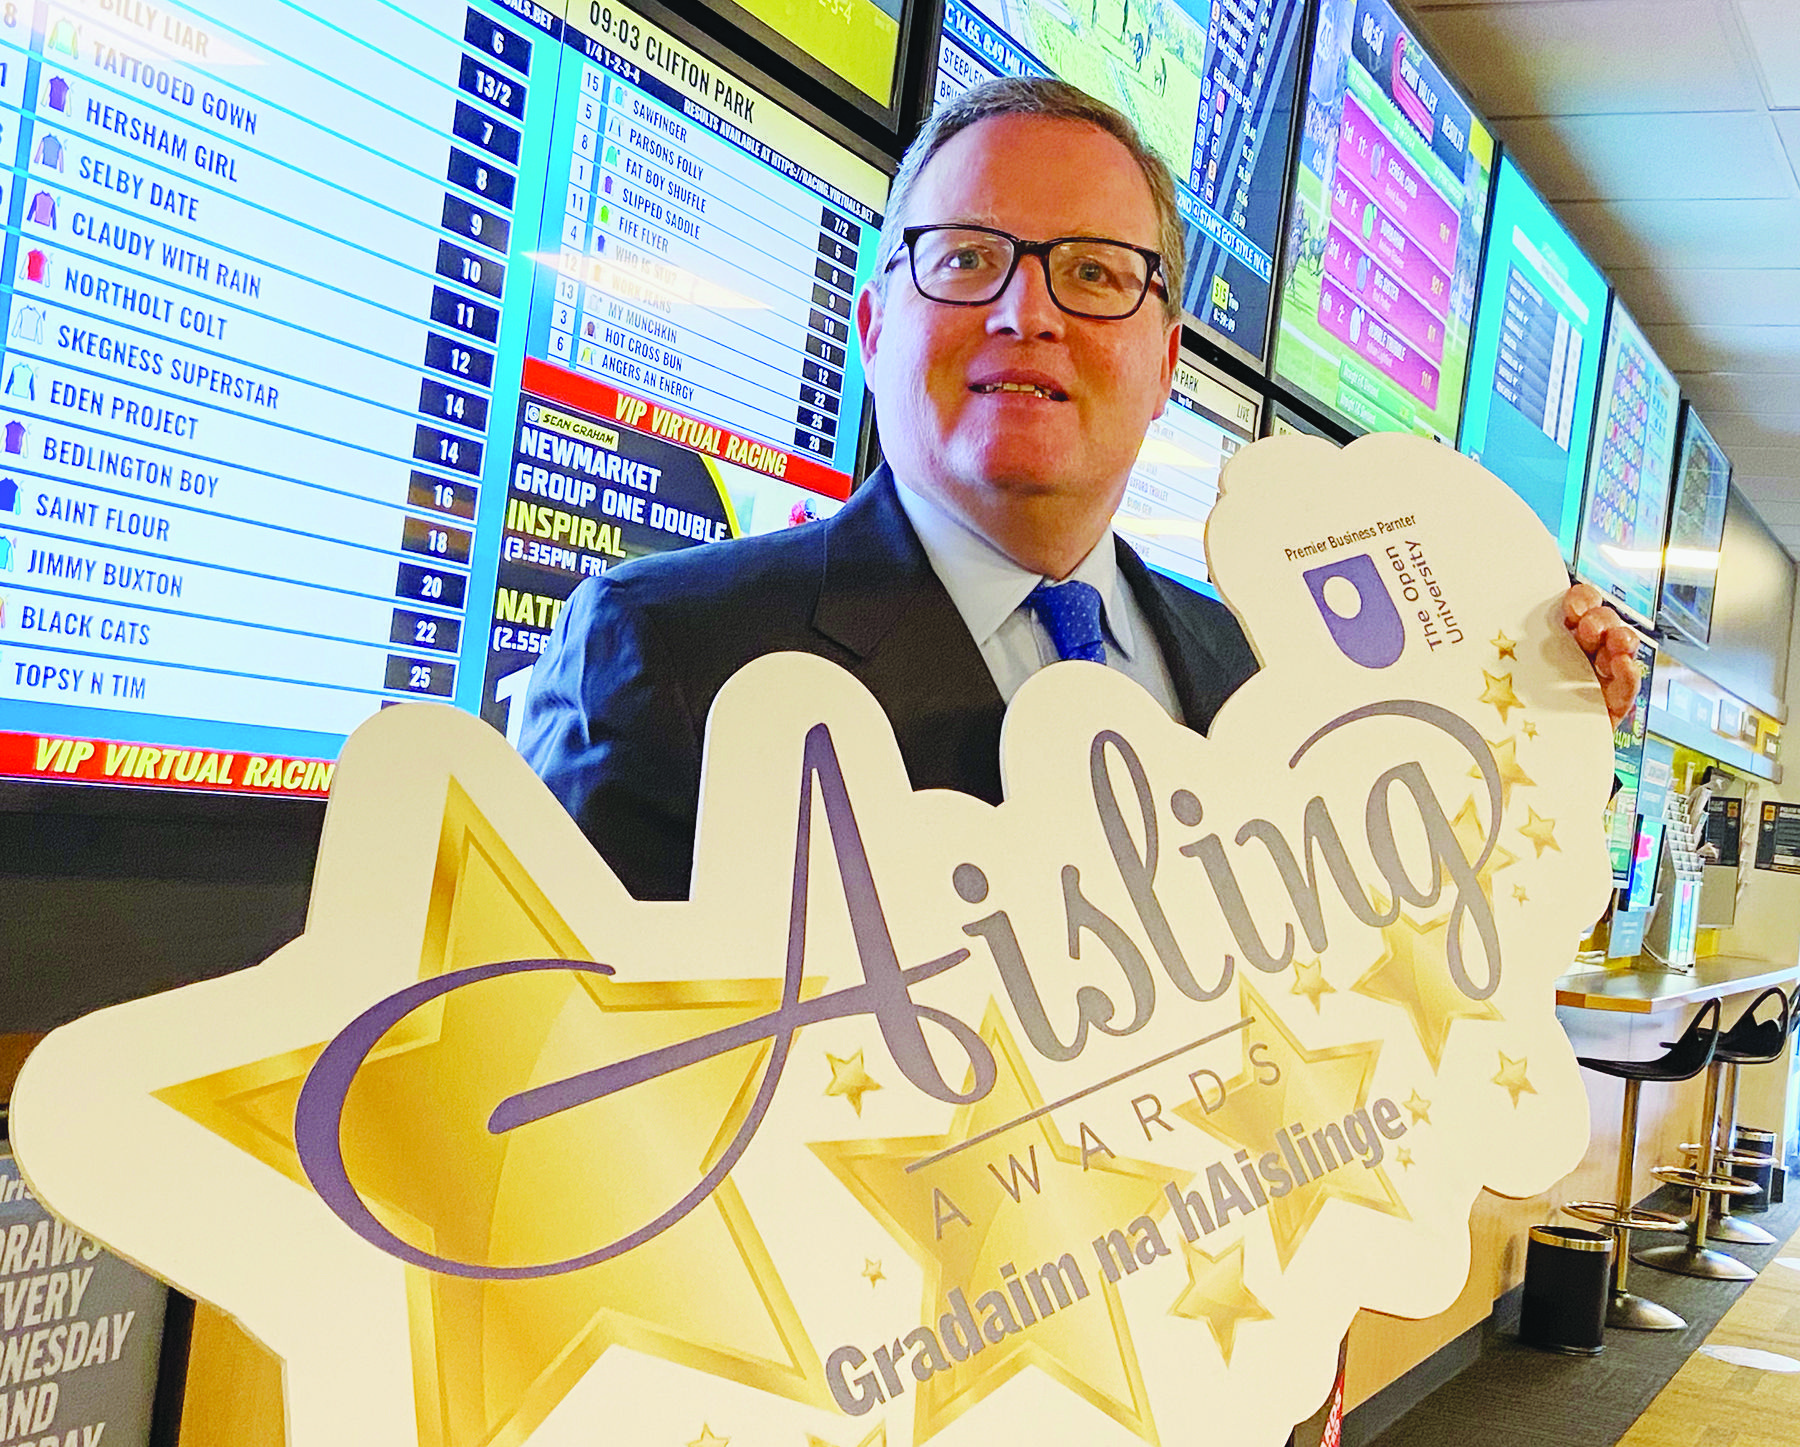 Brian Graham from Sean Graham Bookmakers who will once again sponsor the Aisling Sports Award